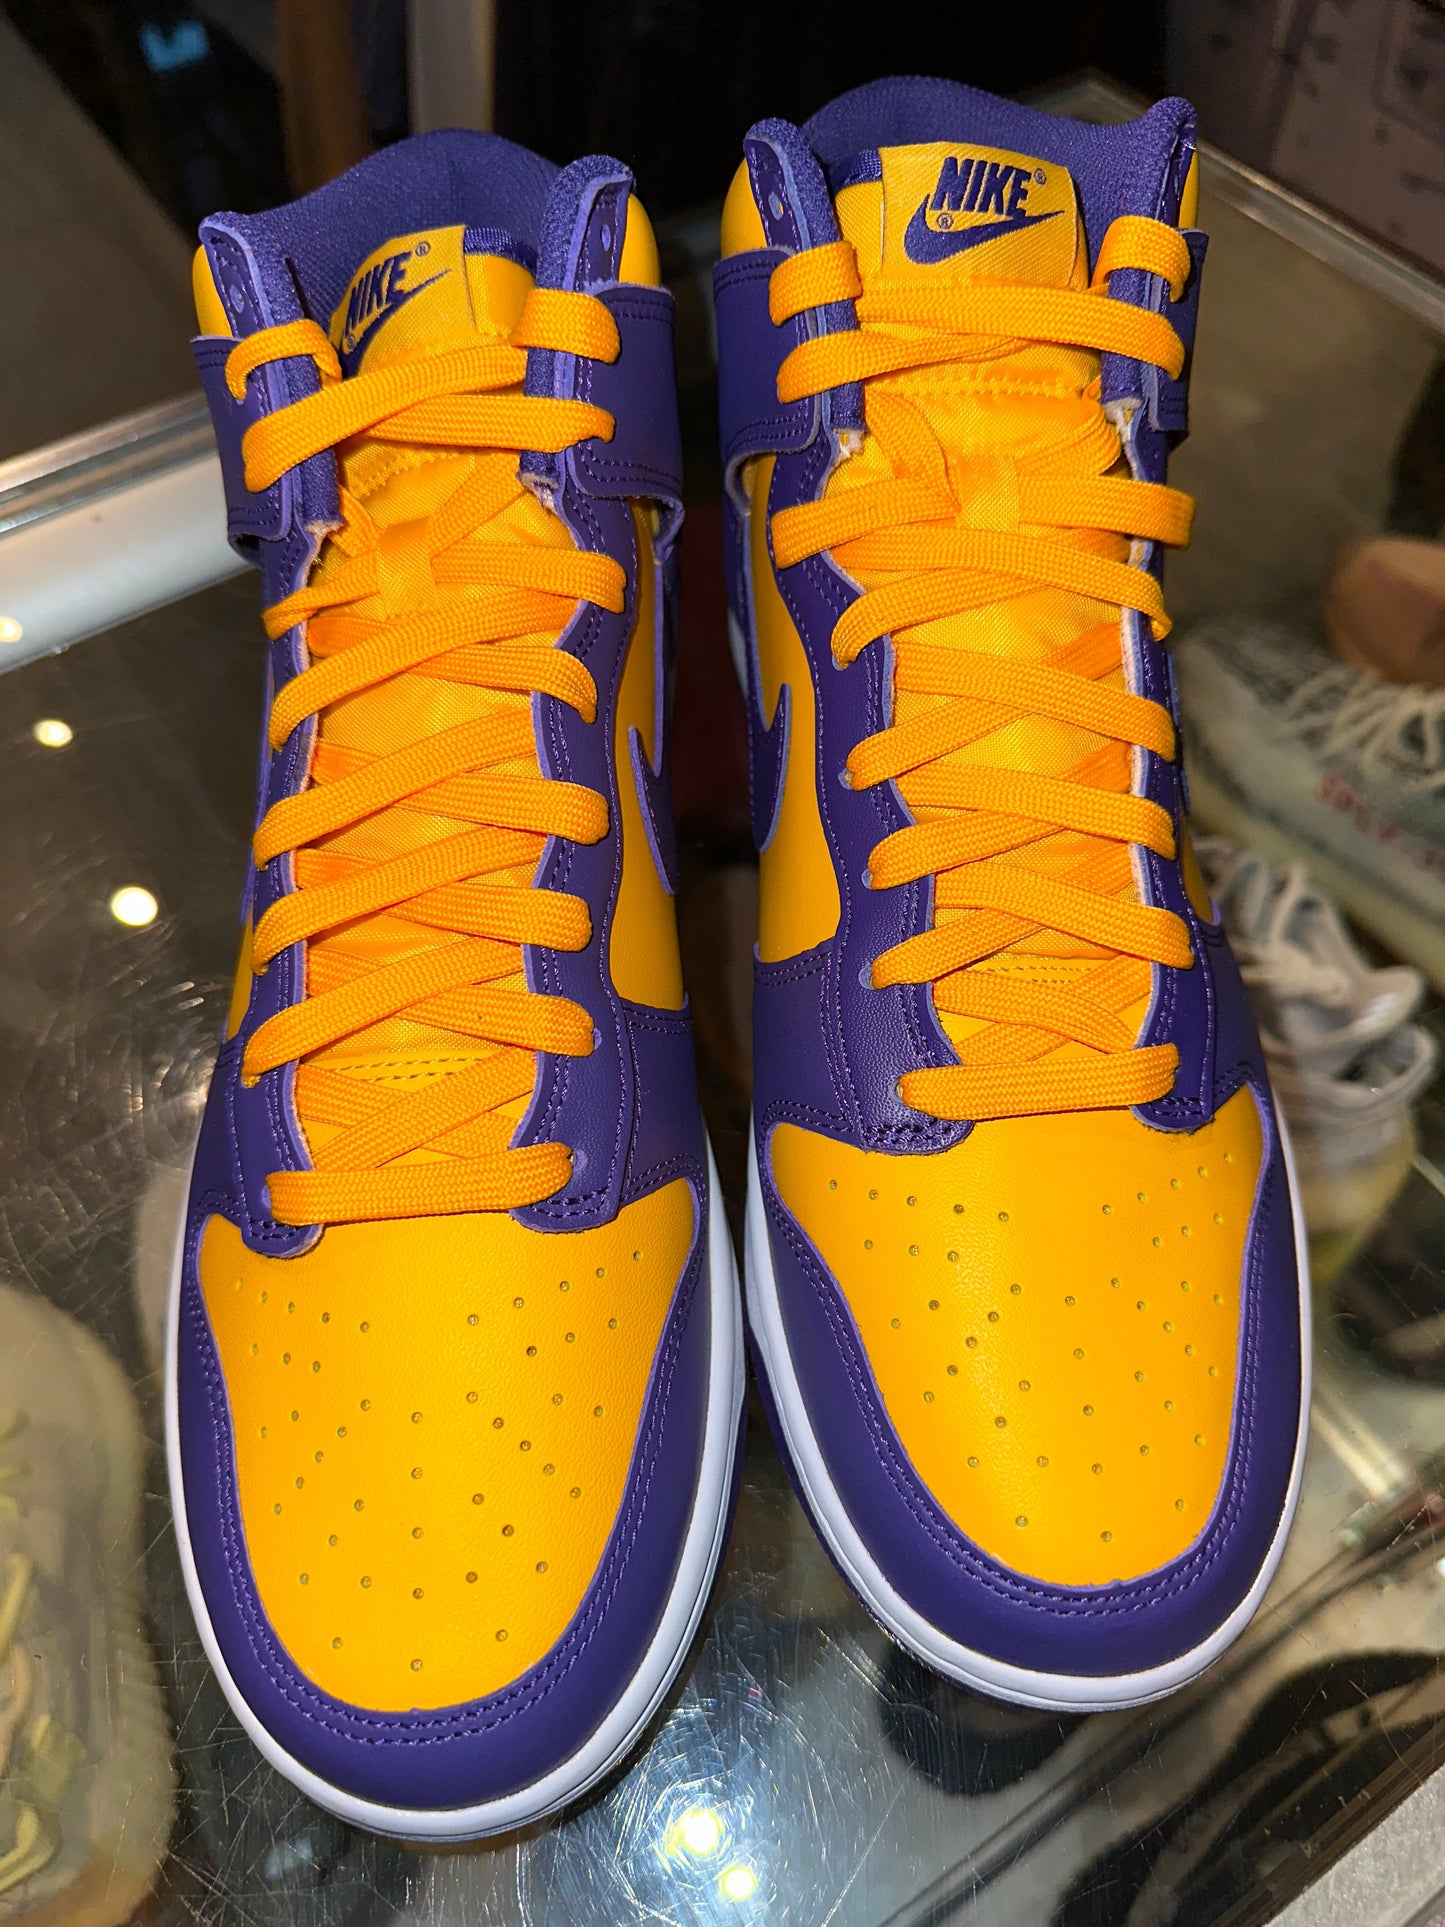 Size 9.5 Dunk High “Lakers” Brand New (Mall)